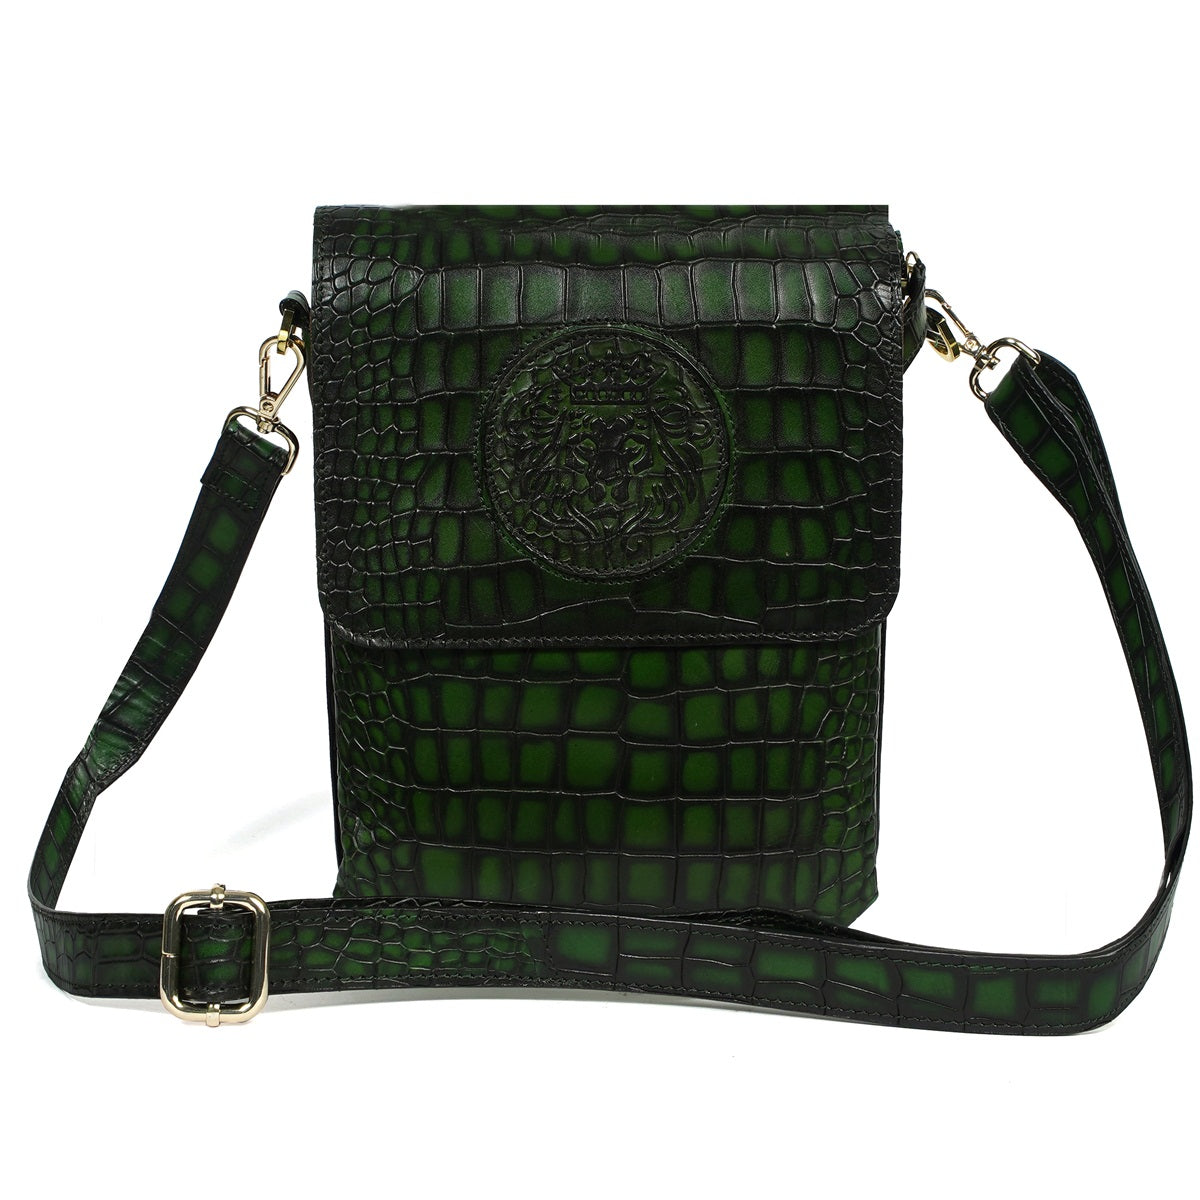 Smokey Green Crossbody Bag in Croco Textured Leather With Embossed Lion